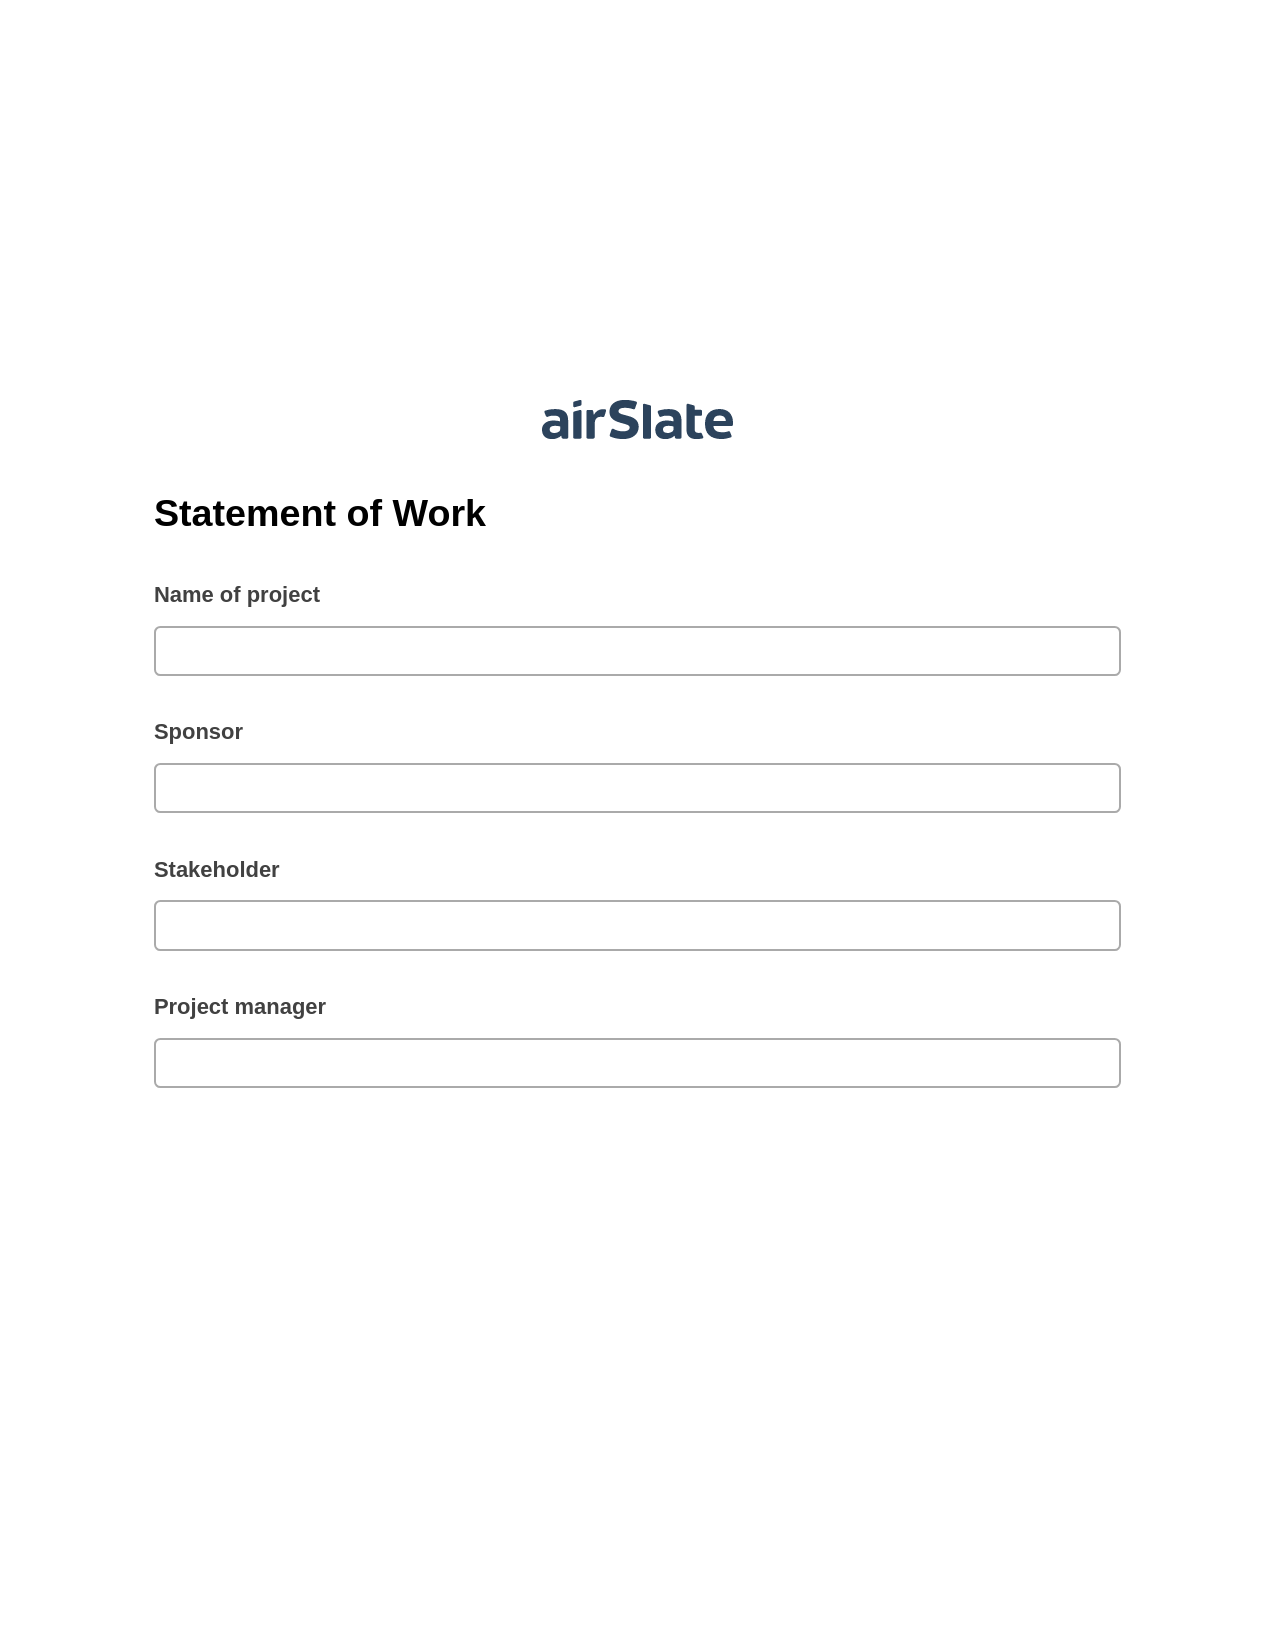 Statement of Work Pre-fill from CSV File Bot, Revoke Access Bot, Export to Google Sheet Bot